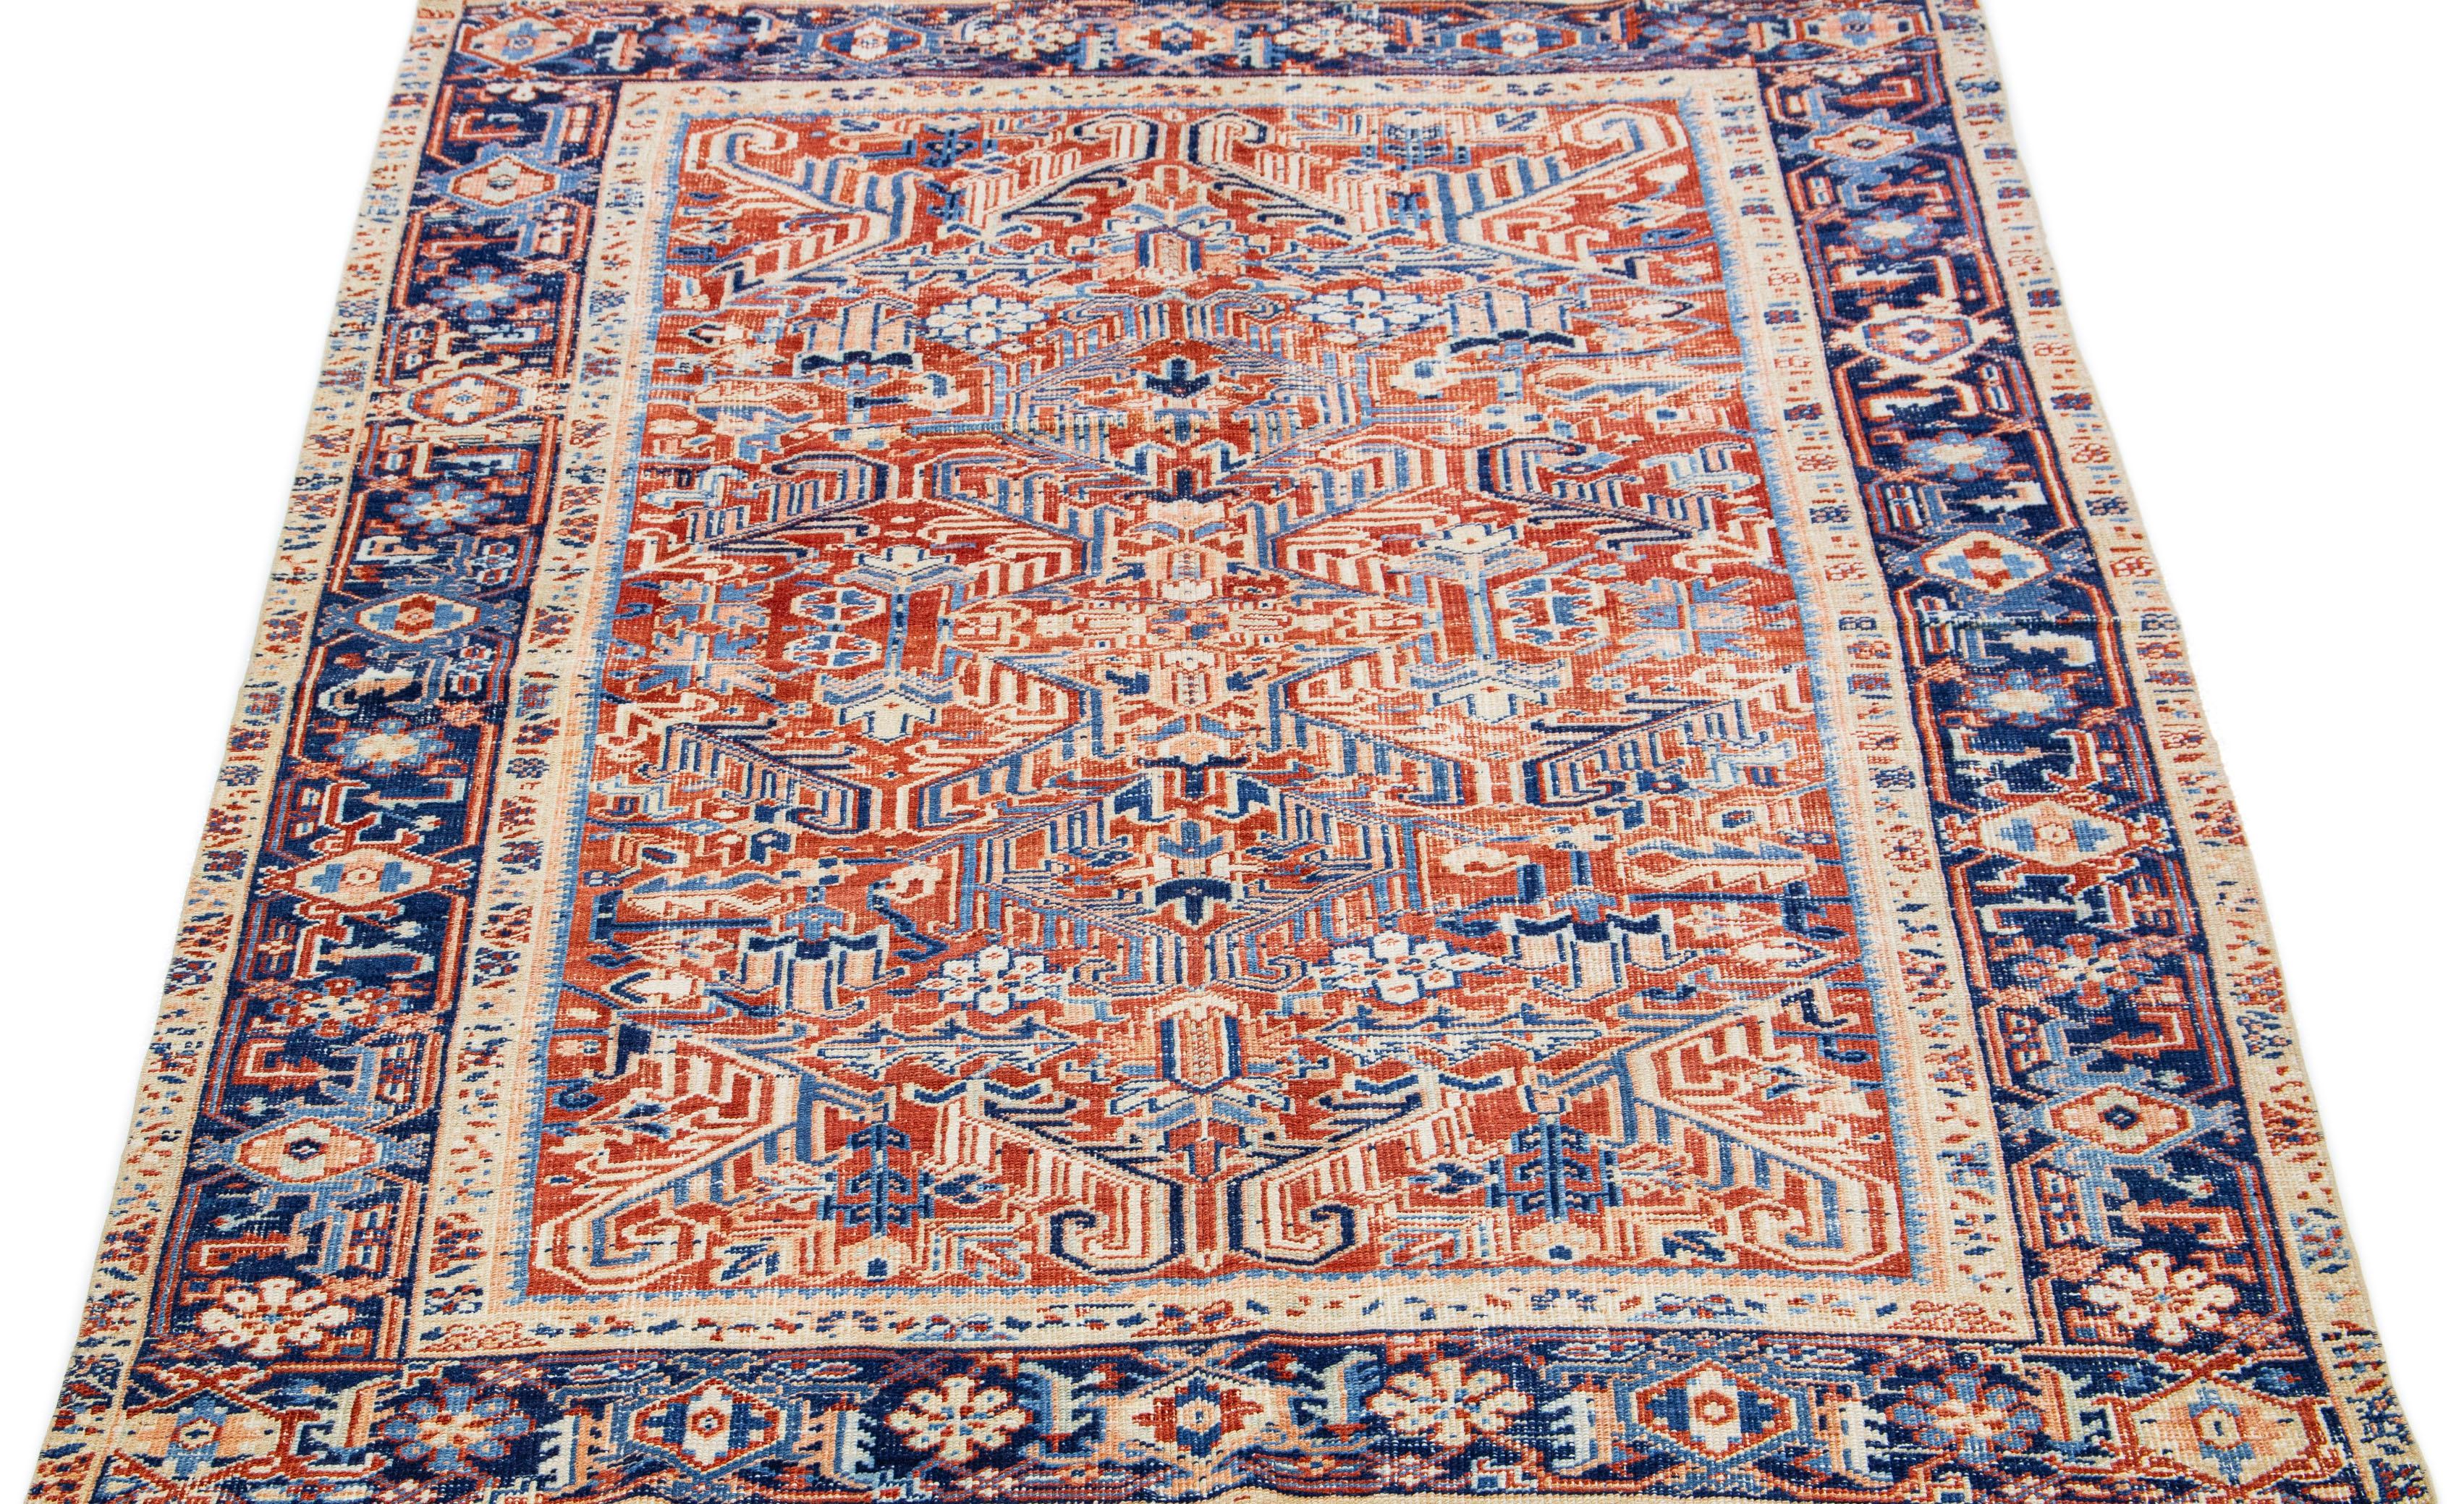 The antique Heriz rug exudes timeless elegance and sophistication with its premium hand-knotted wool and striking all-over design. The eye-catching geometric floral pattern in shades of blue and beige adds a touch of allure to the soft peach field,